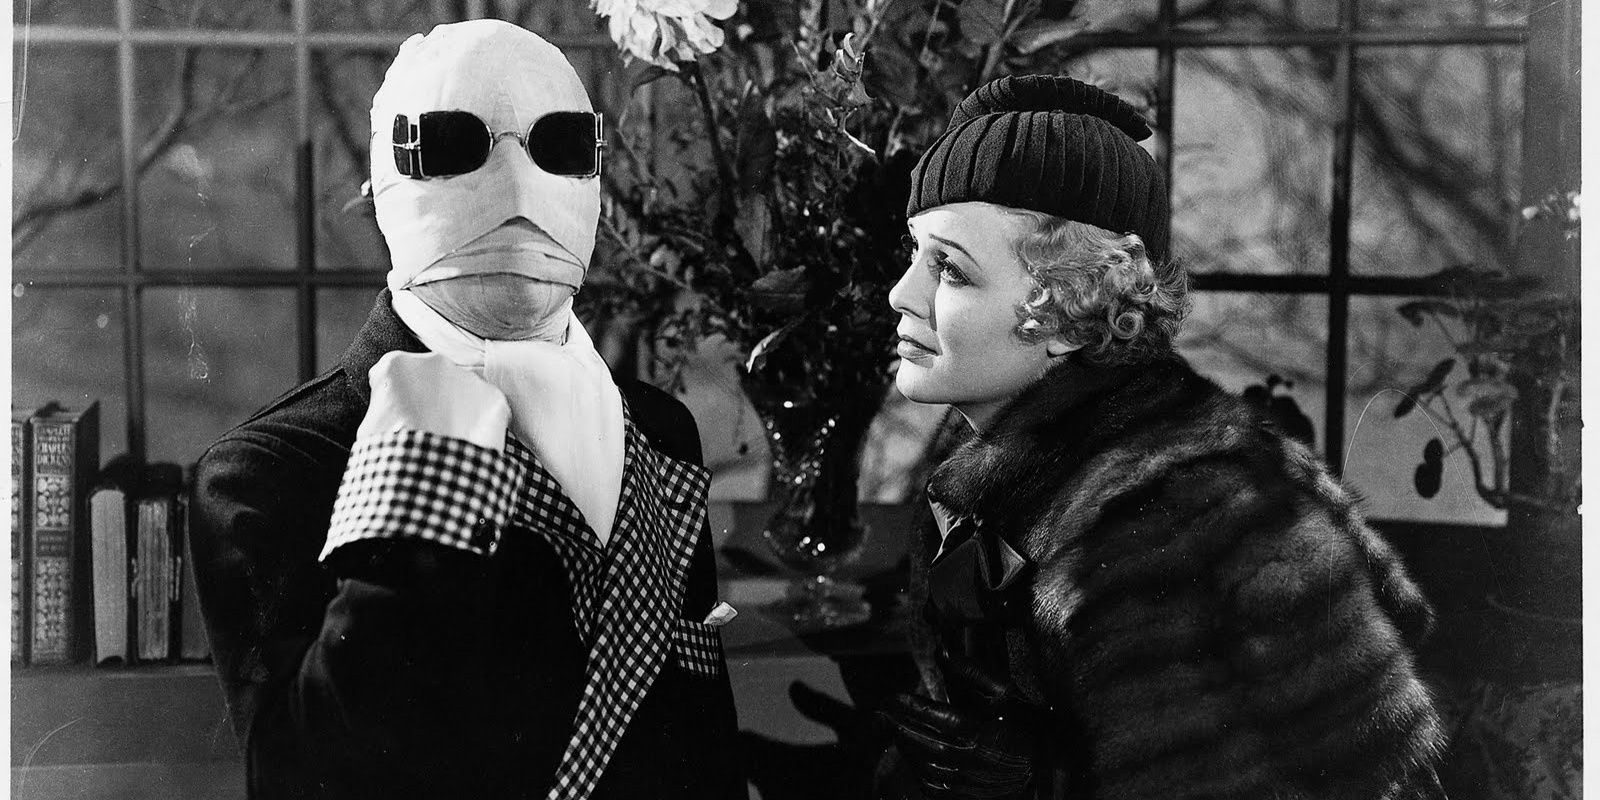 The Invisible Man with Flora Cranley in 1933's The Invisible Man